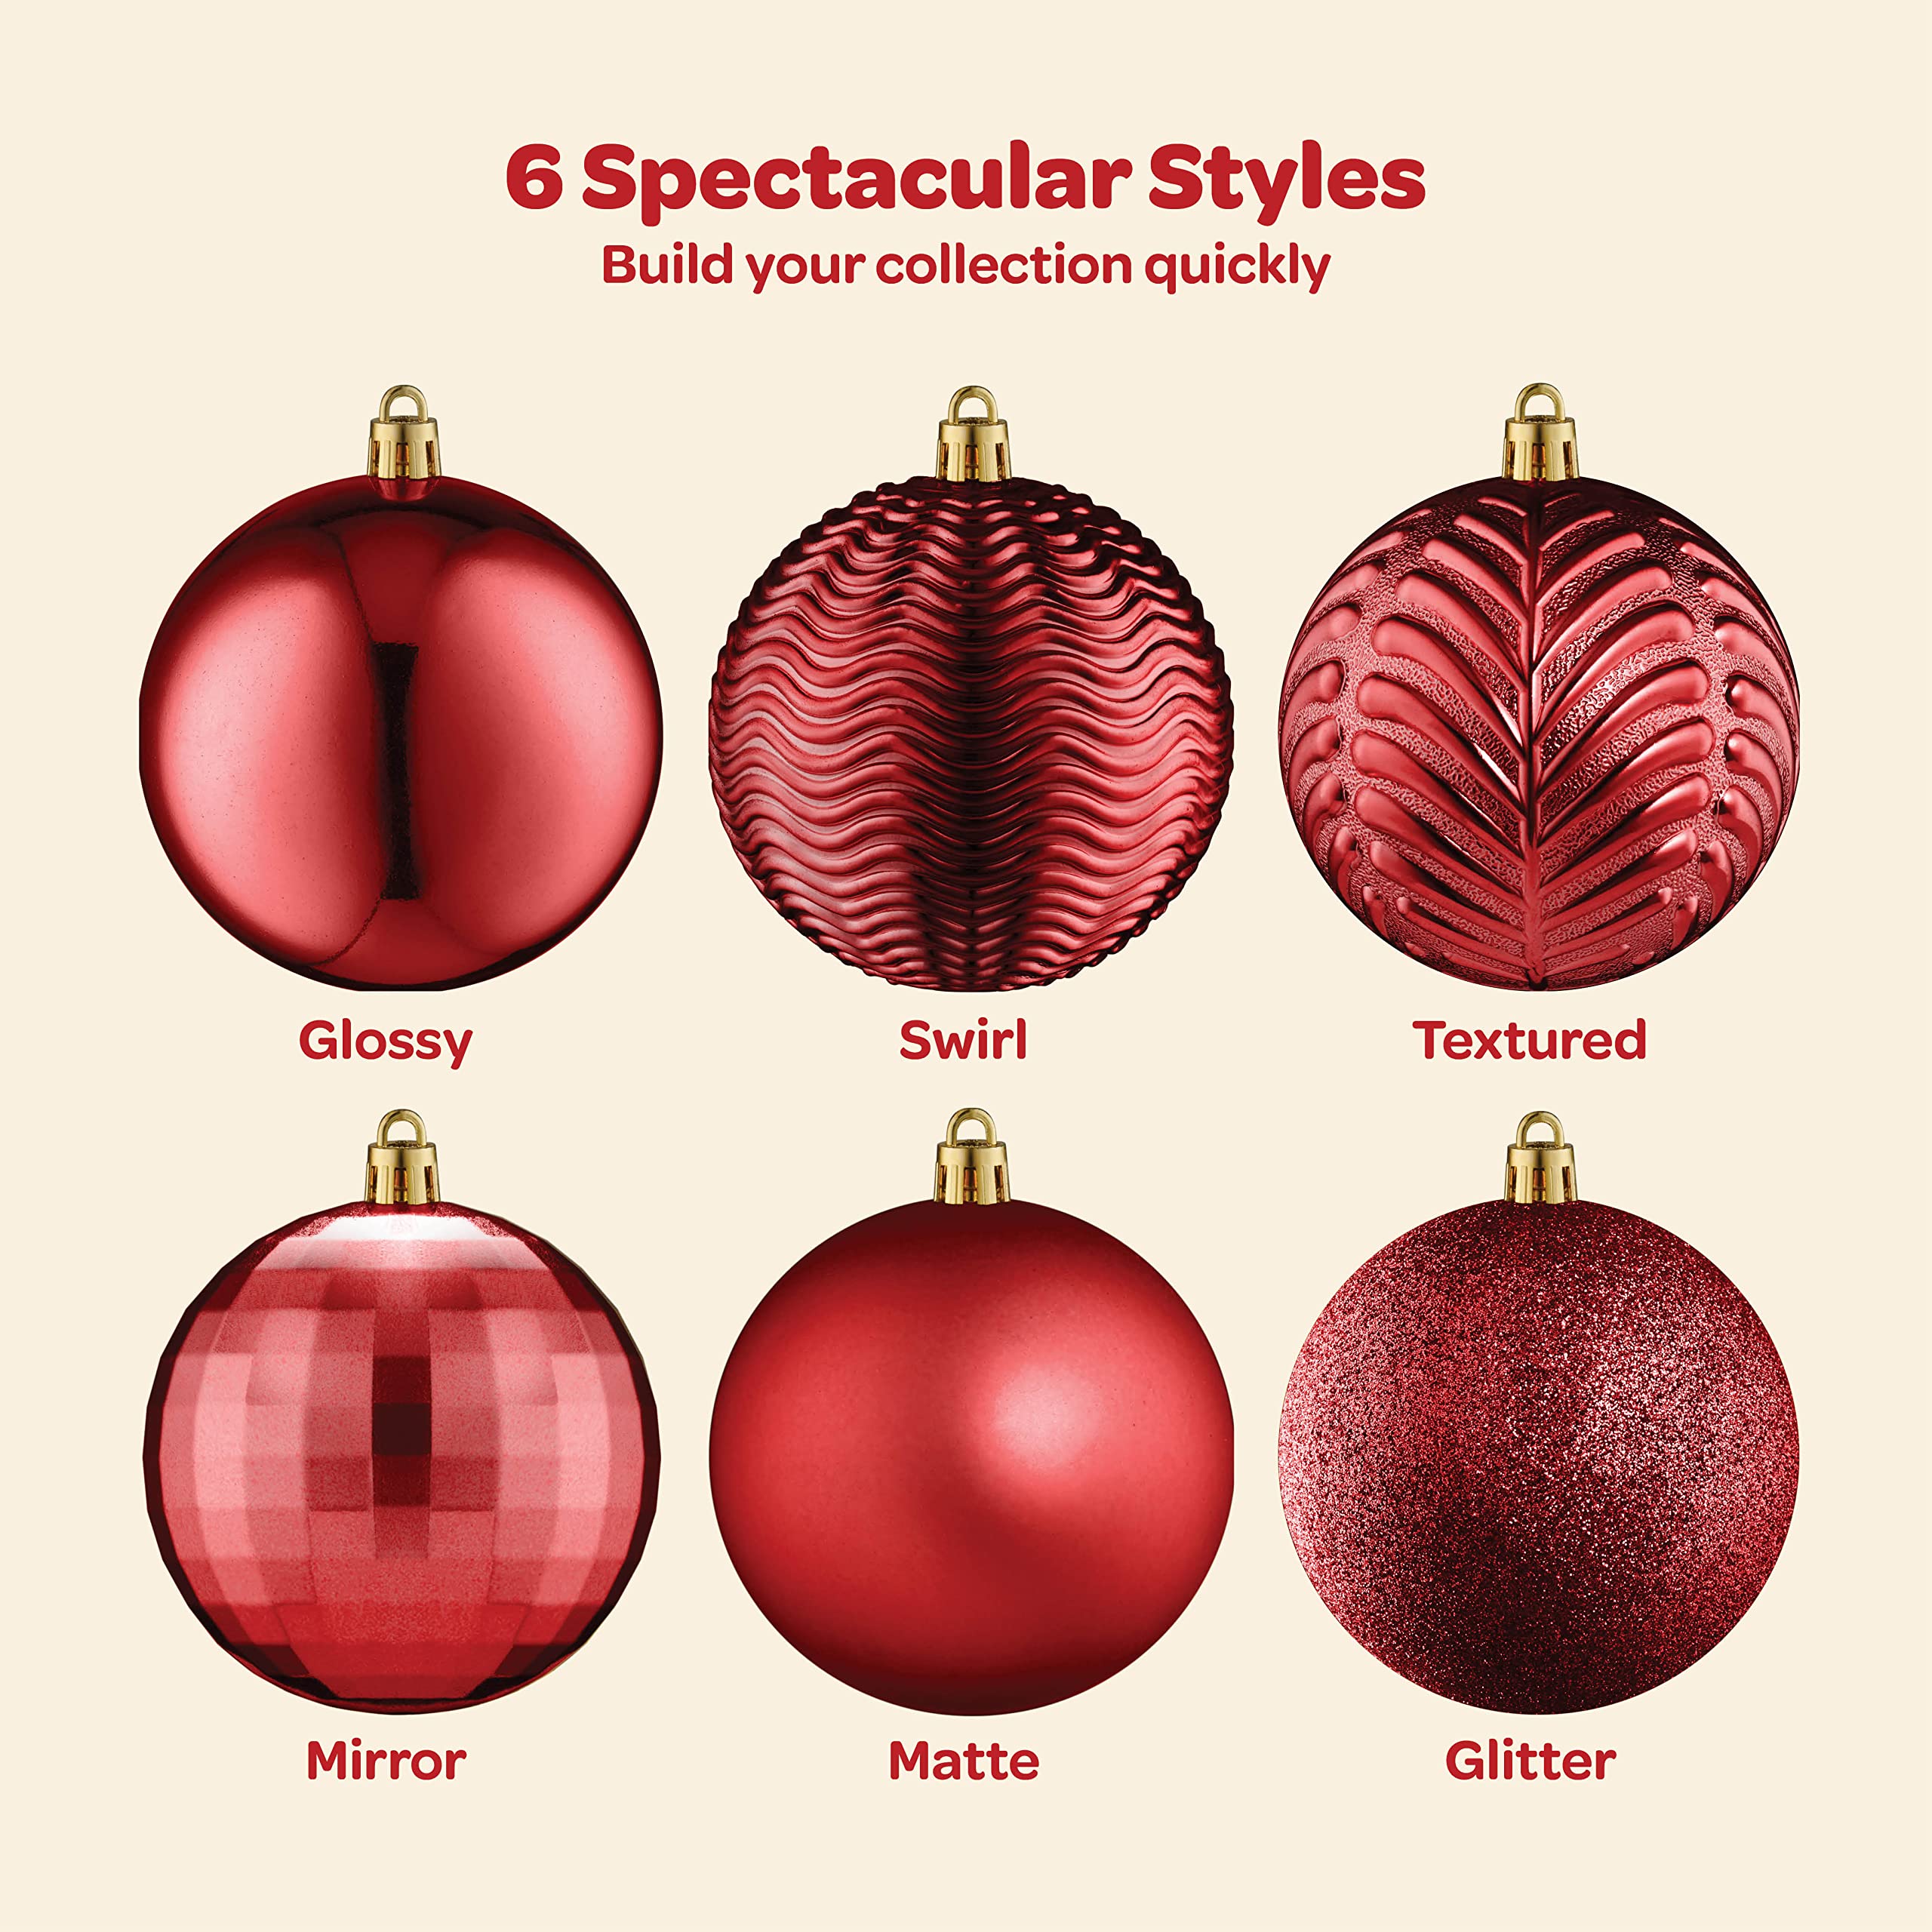 Christmas Ornaments Set of 36 - Beautiful [Wine-Red] Christmas Tree Decorations Ornaments Set - 6 Style Christmas Ball Ornaments - Shatterproof/Pre-Strung - for Holiday/Party/Decorations/DIY  - Very Good